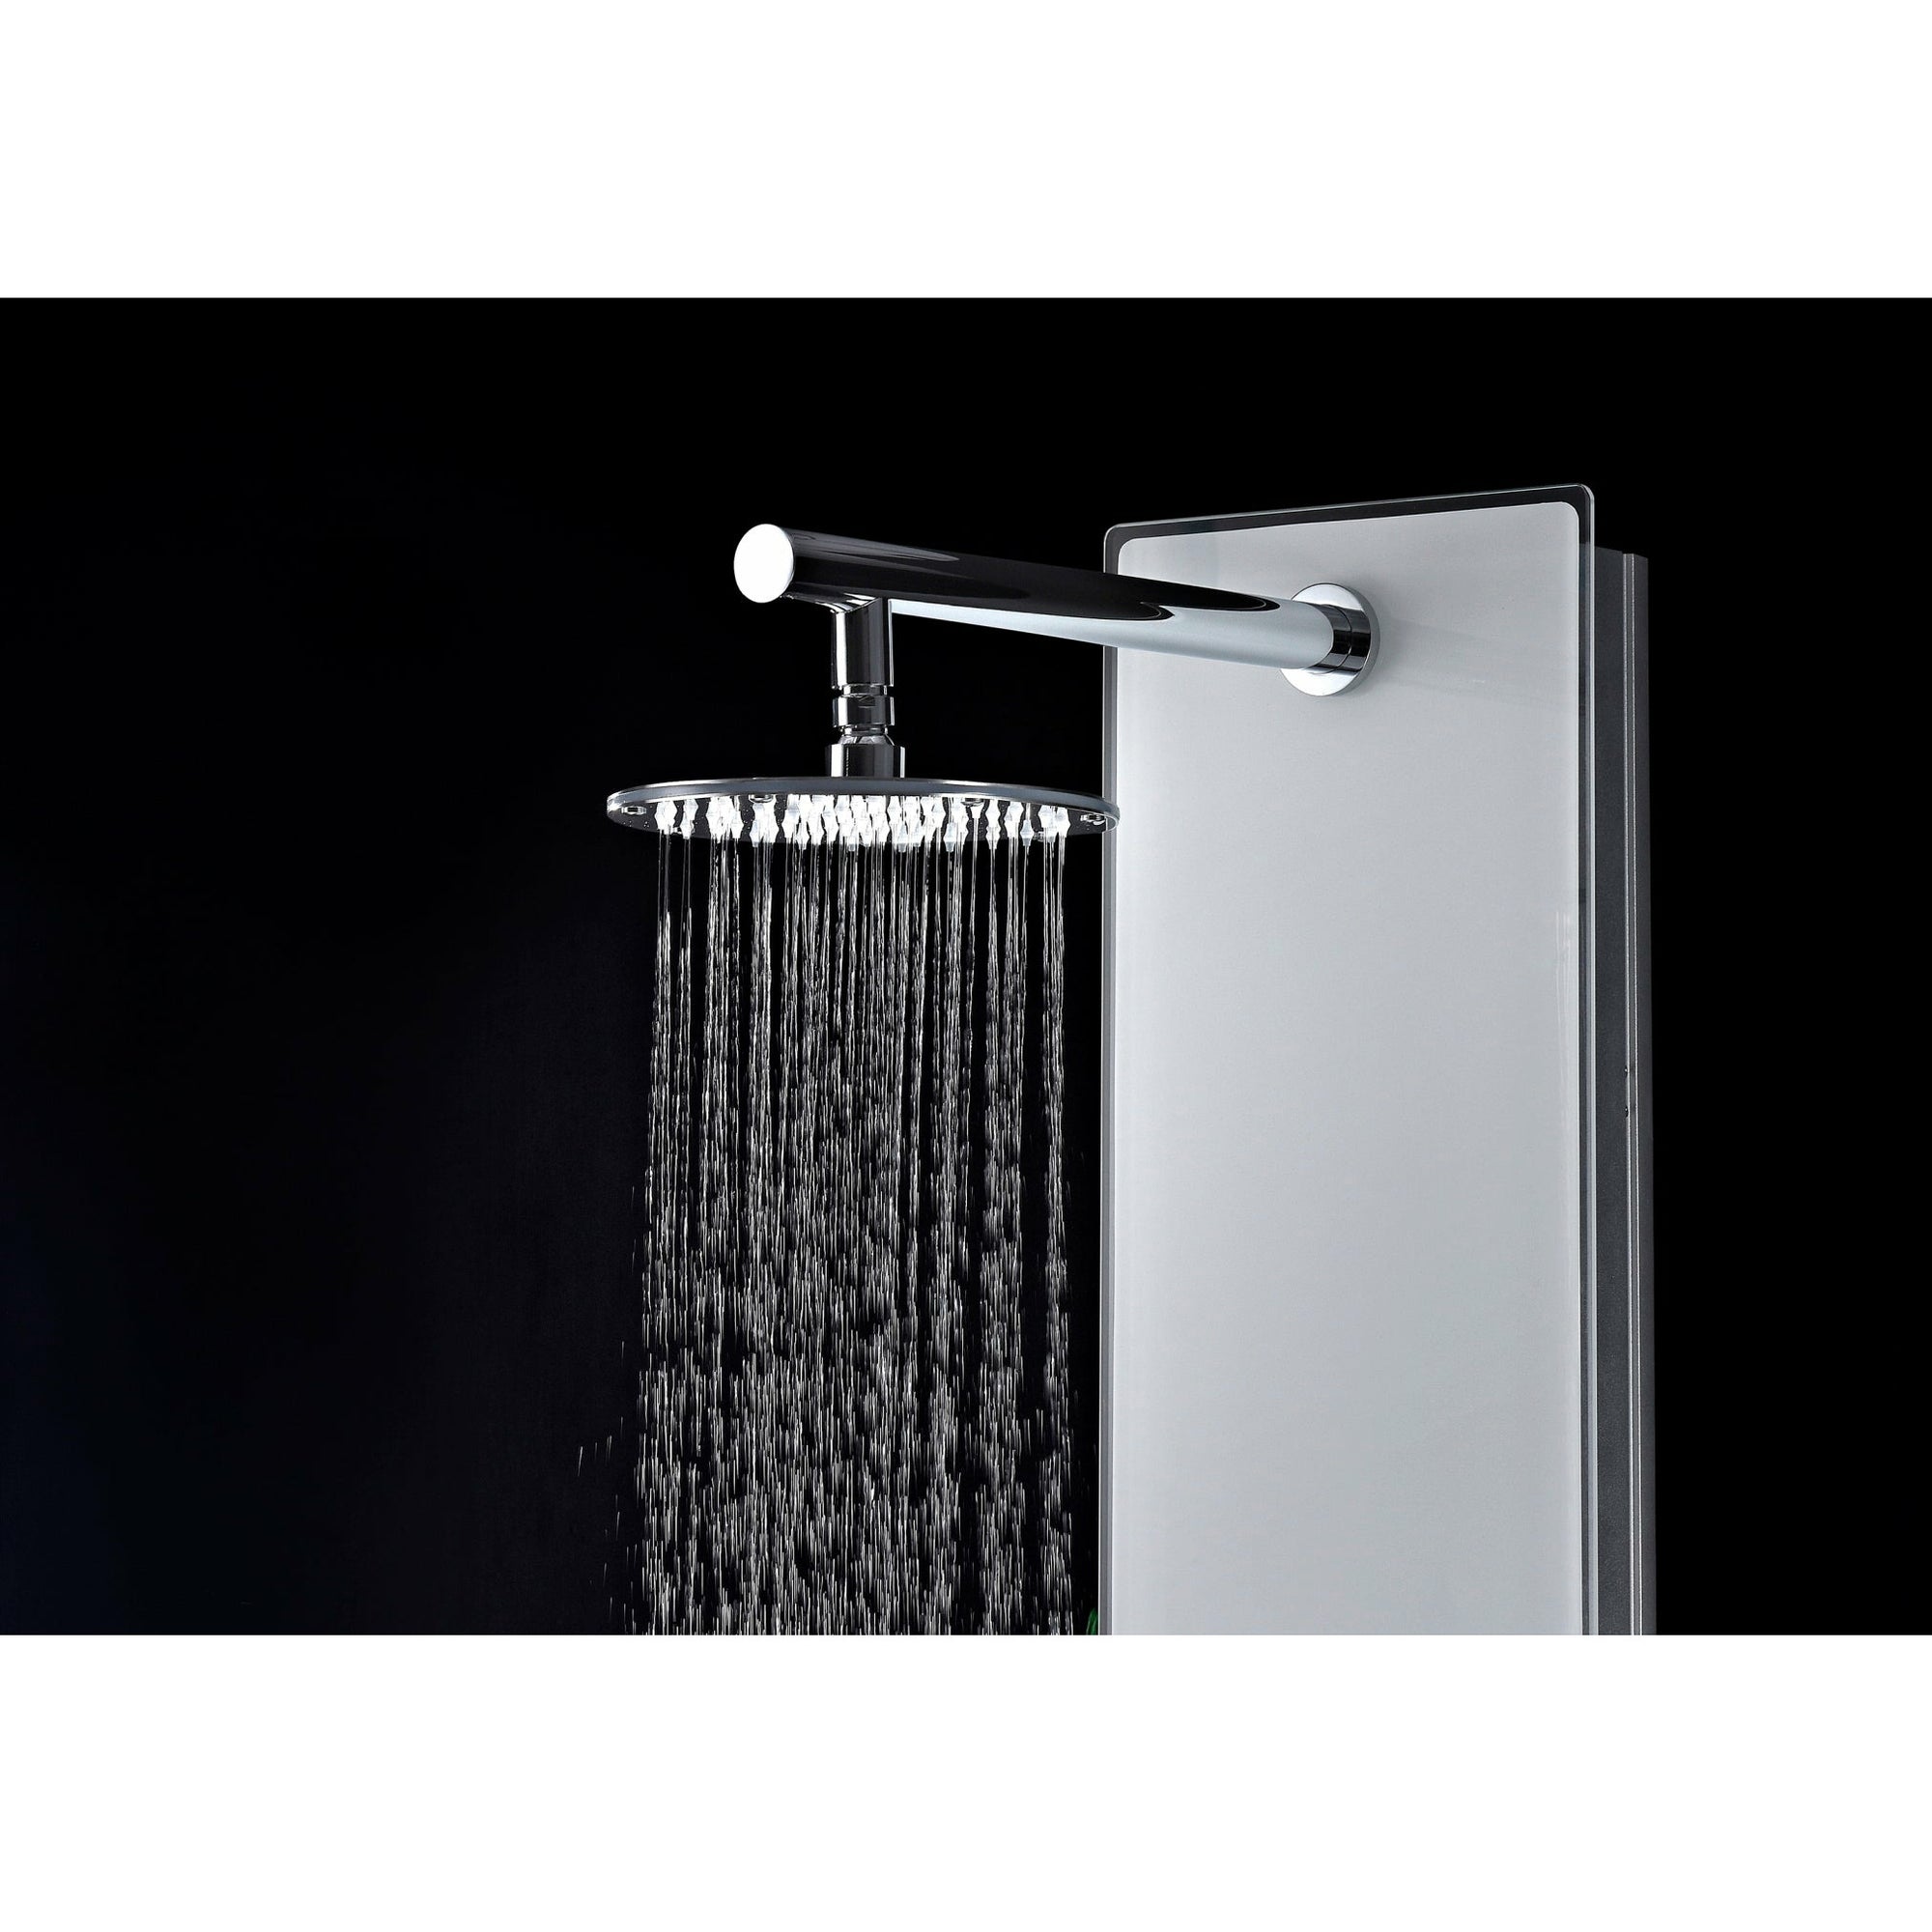 Anzzi Veld Series 64 Inch Full Body Shower Panel with Swiveling Crested Heavy Rain Shower Head, Two Shower Control Knobs, Four Acu-stream Vector Massage Body Jet Sets and Euro-grip Hand Sprayer SP-AZ048 - Vital Hydrotherapy